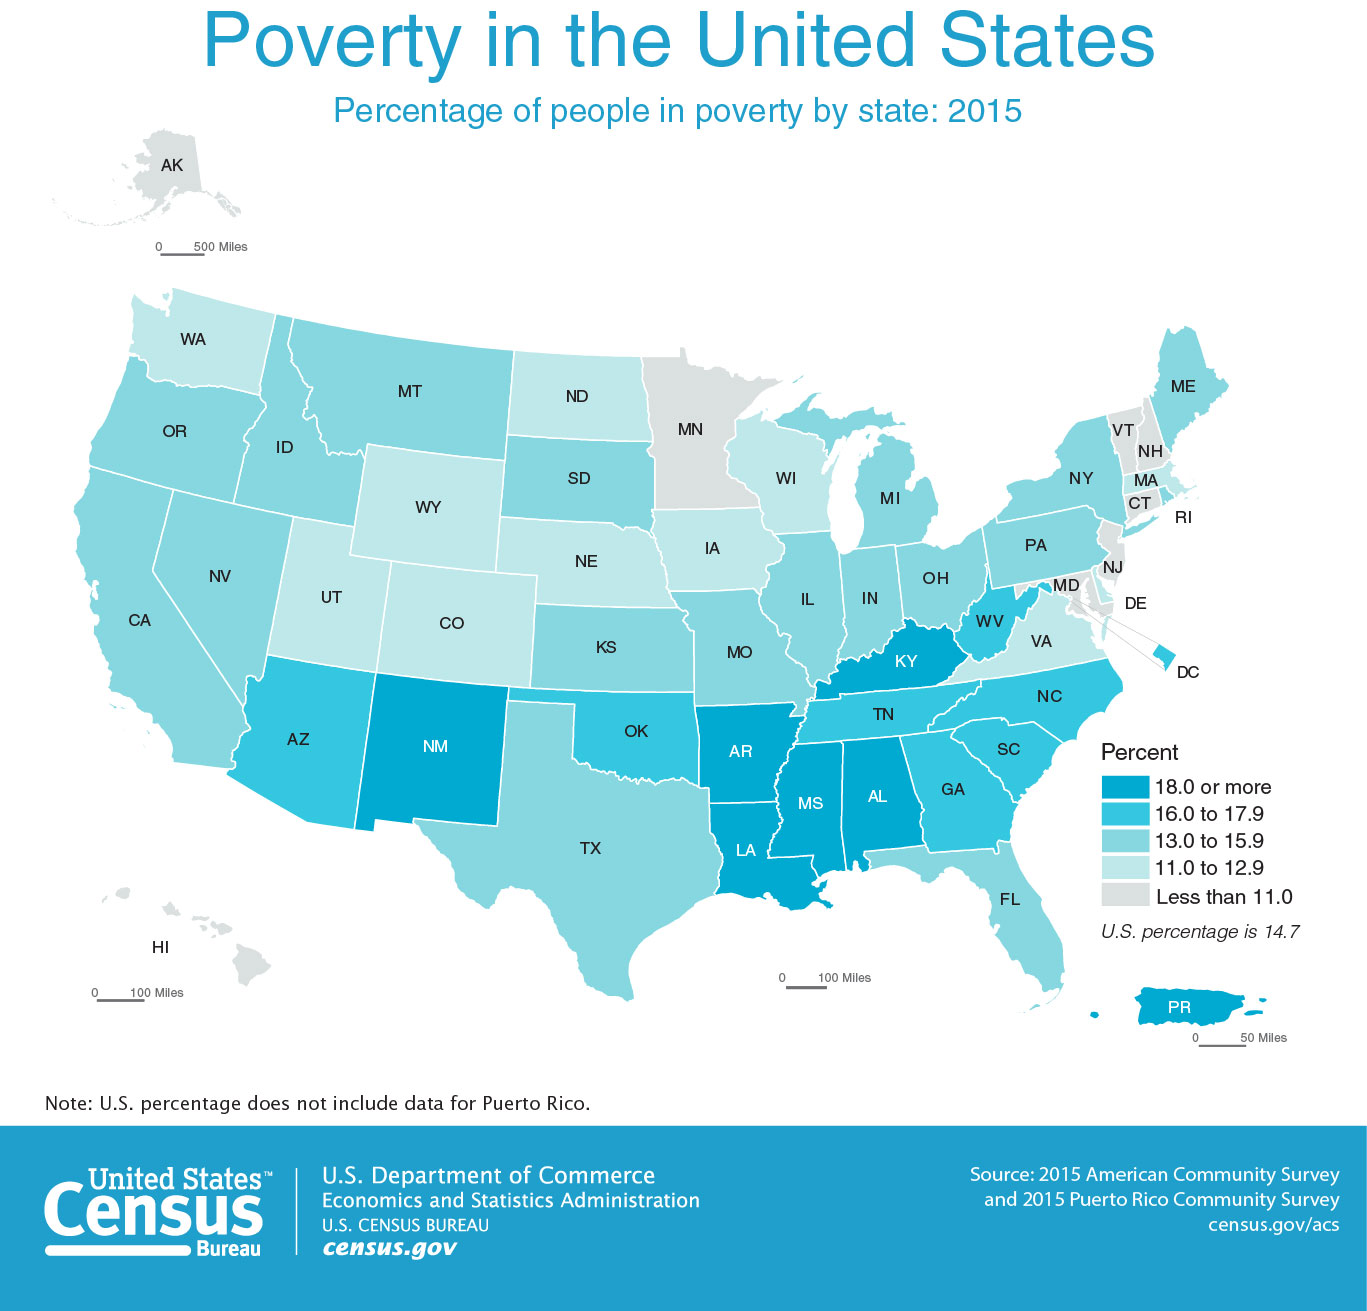 Choropleth map of Poverty in the United States, see text below image